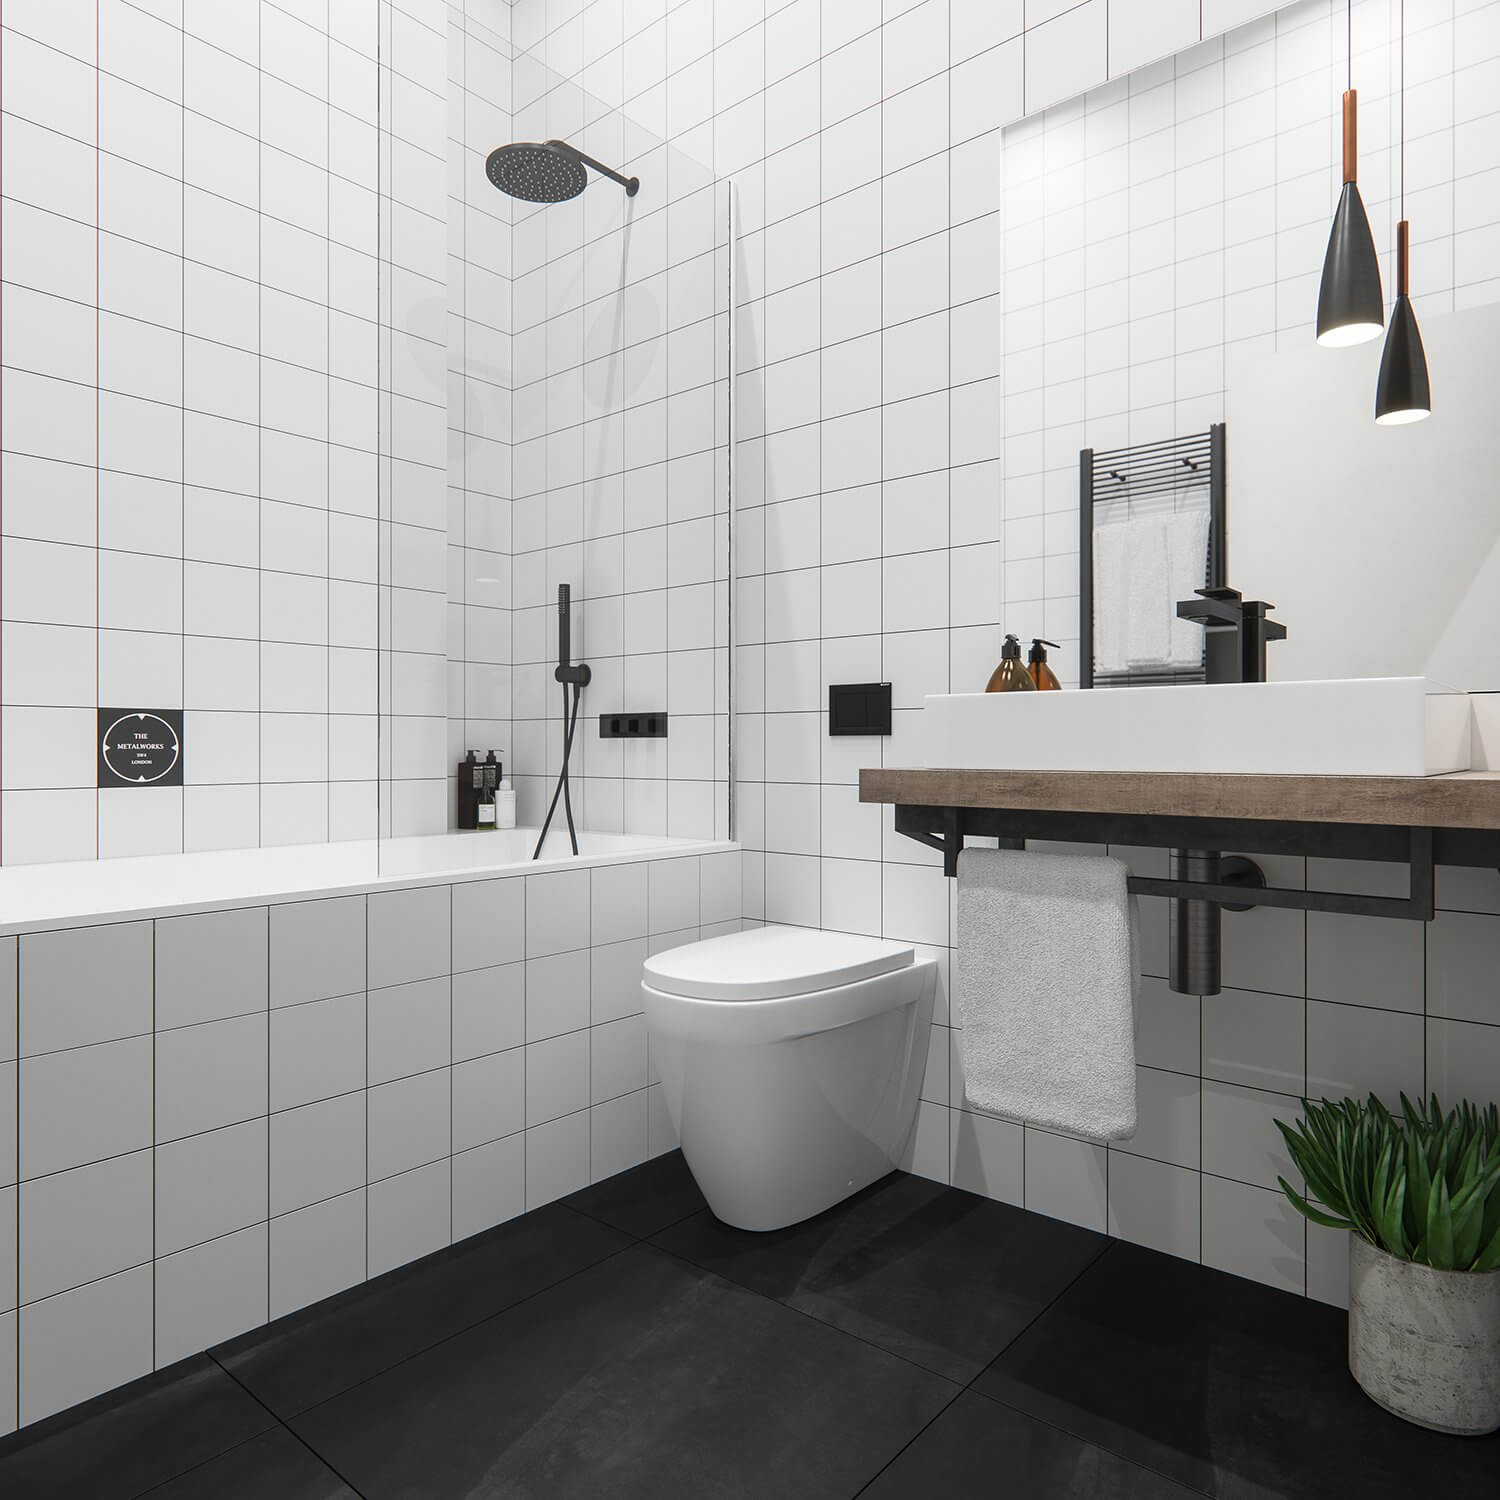 7 Old Town Clapham Apartment shower wc - cgi visualization